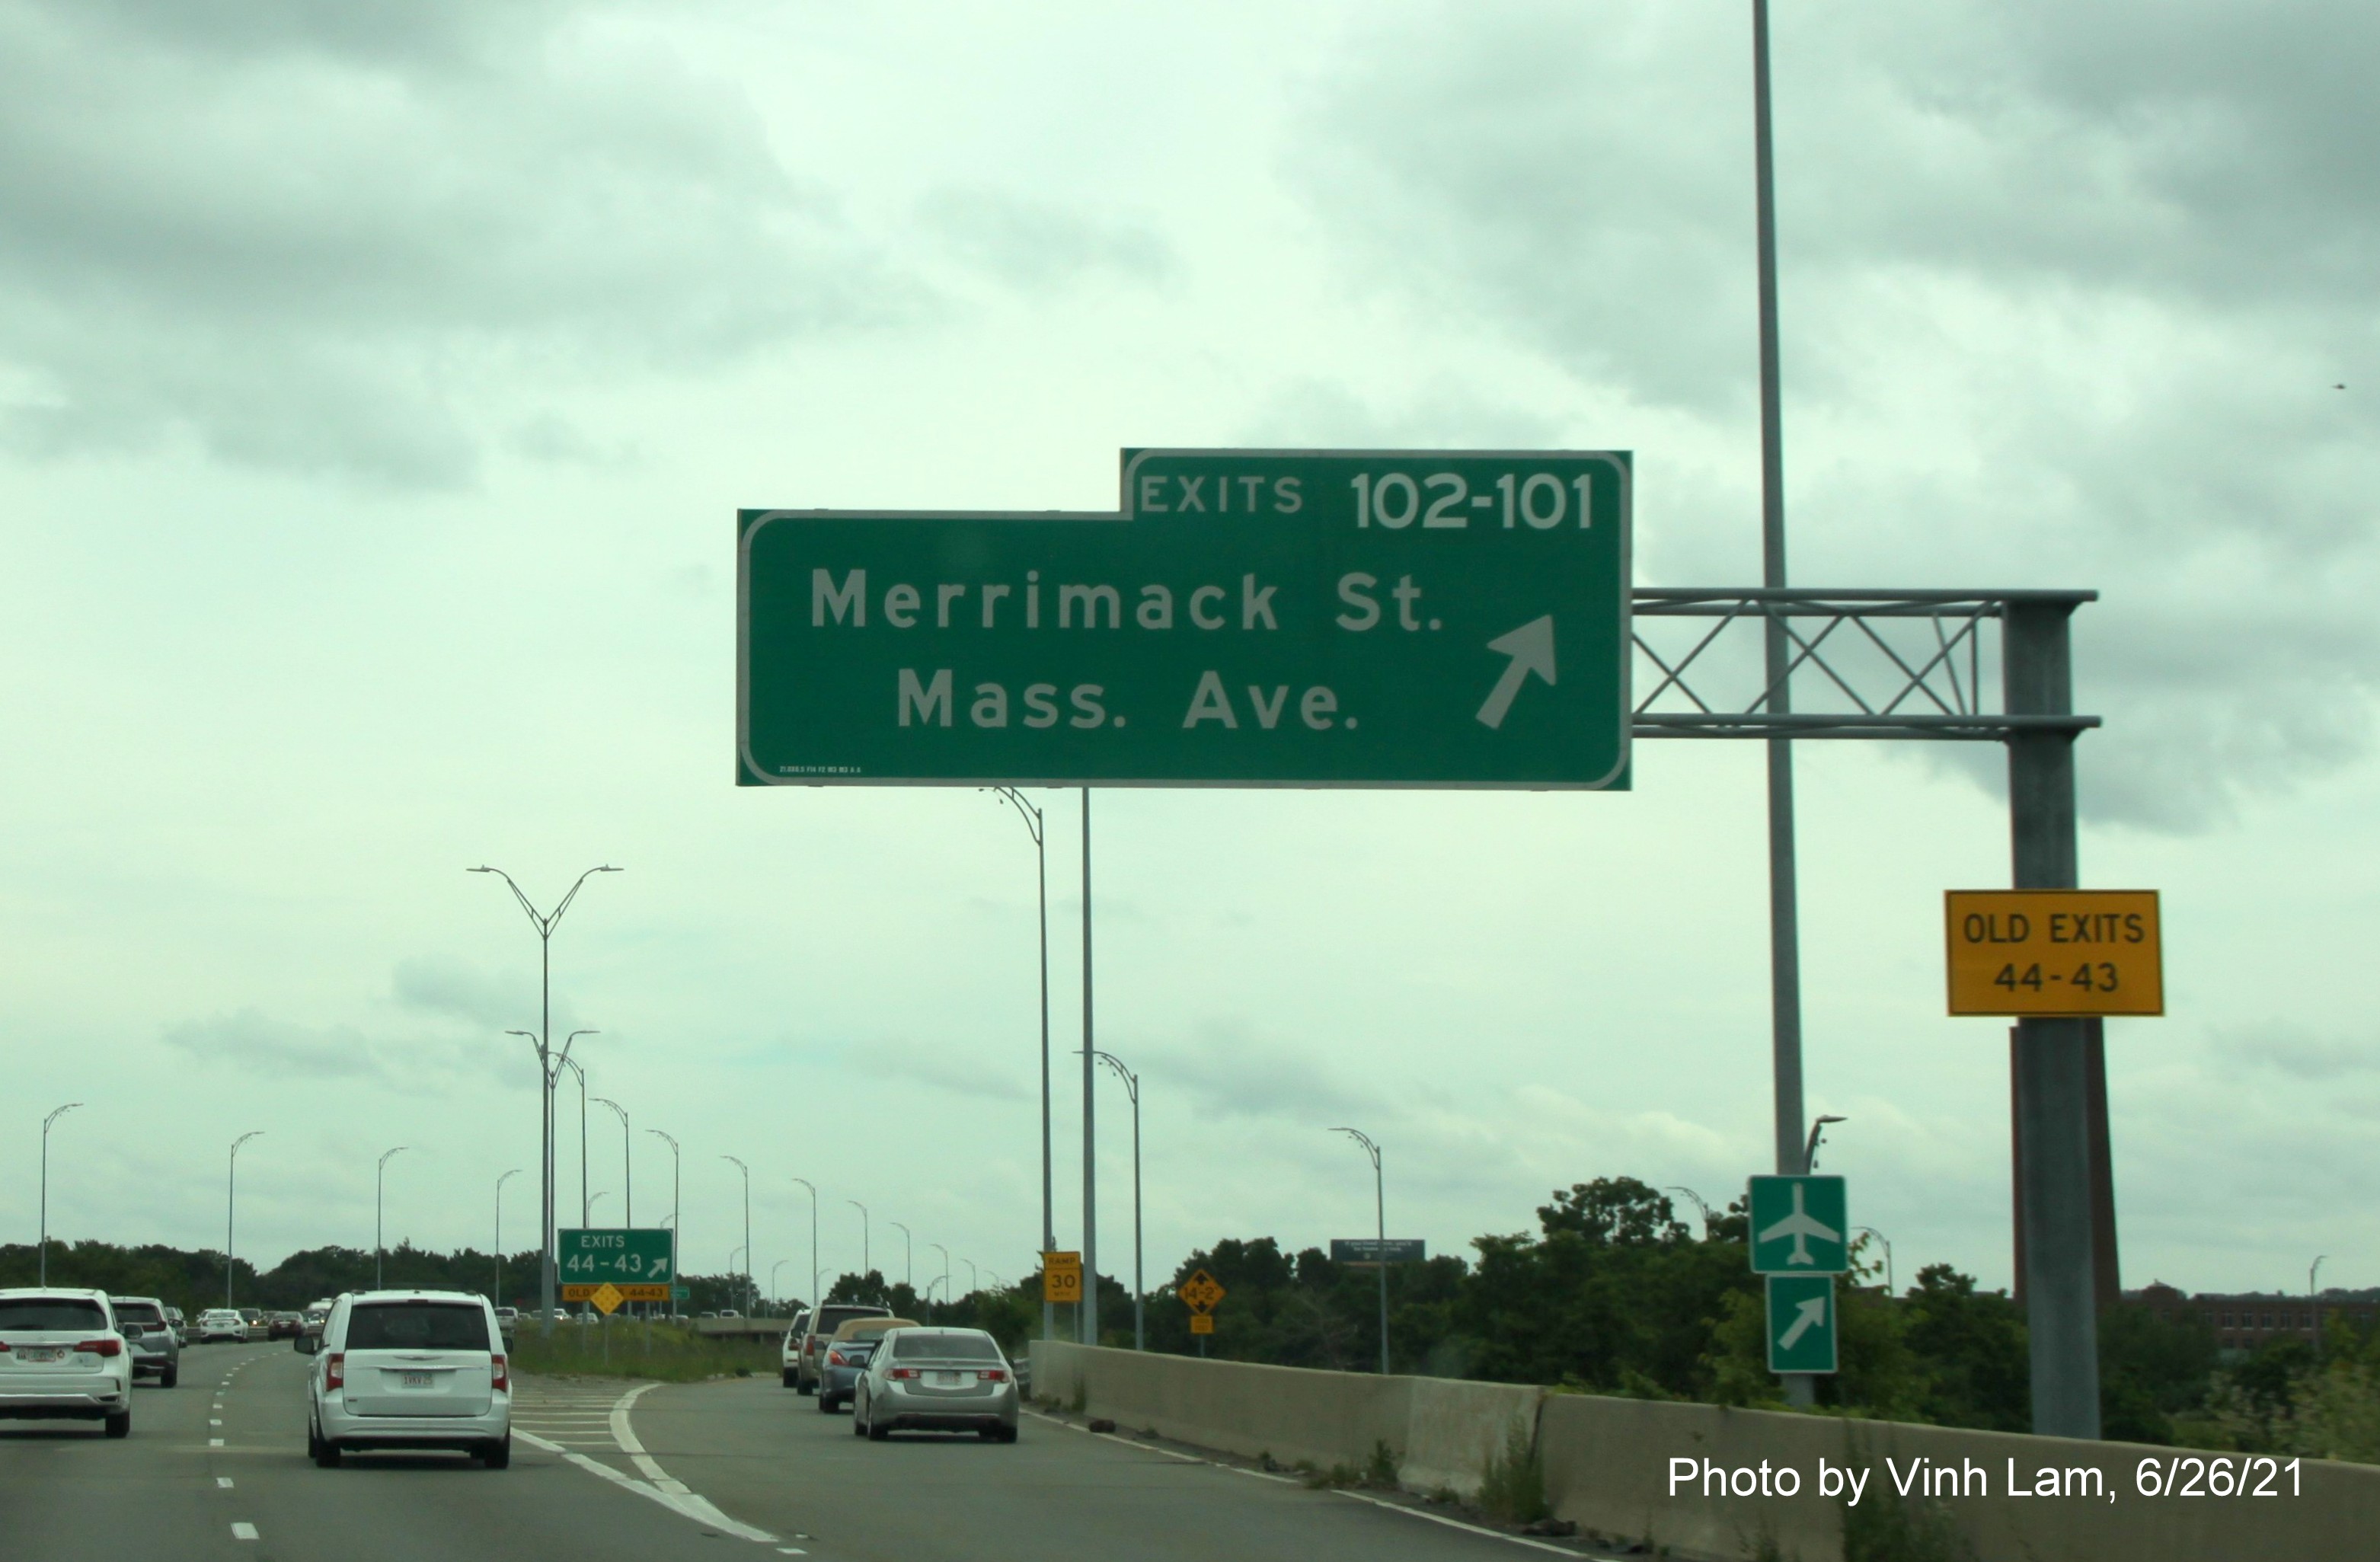 Image of overhead ramp signs for Merrimack Street and Mass. Avenue exits with new milepost based exit number and yellow Old Exits 44-43 advisory sign on support on I-495 South in Lawrence, by Vinh Lam, June 2021